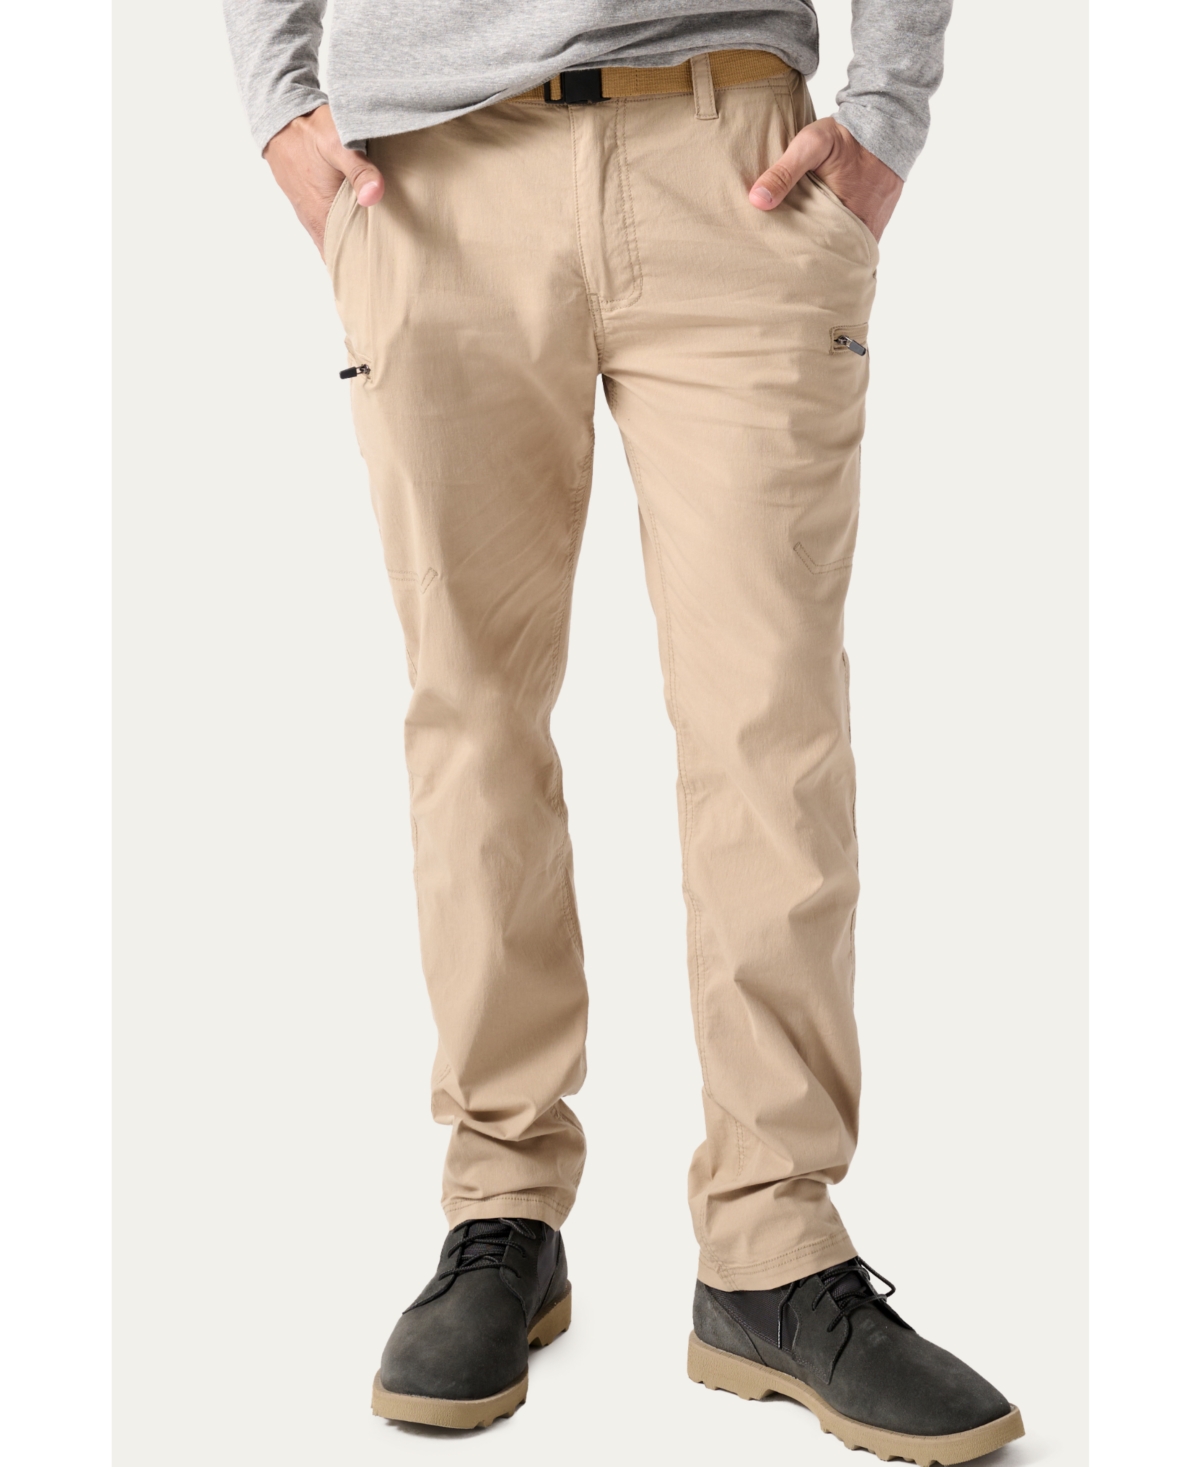 Journeymen Stretch Belted Men's Cargo Pant - Natural gray